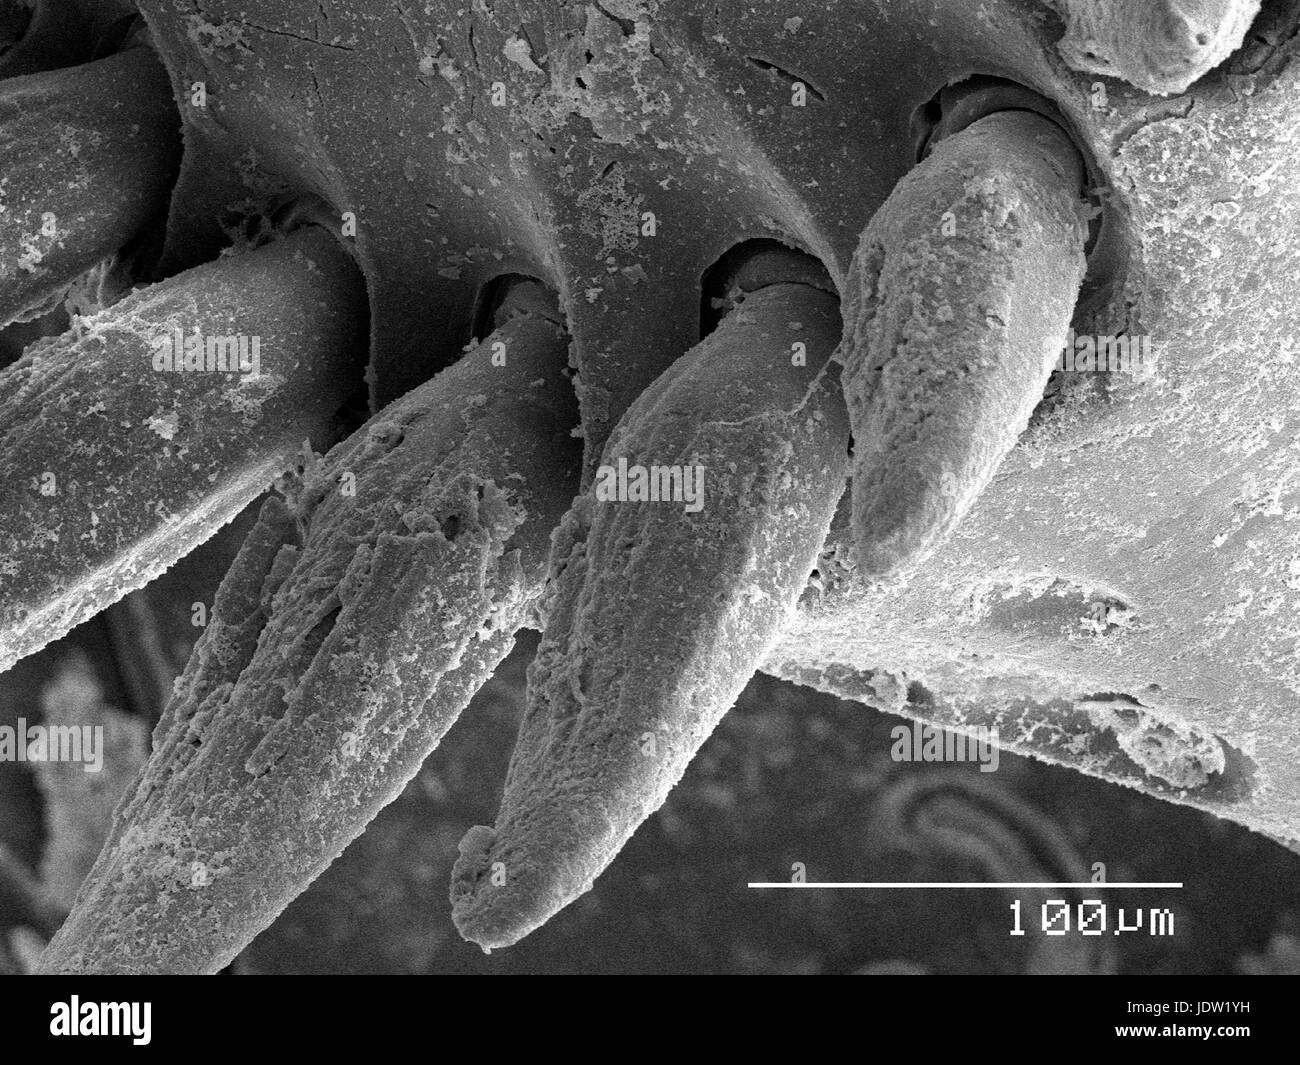 Magnified view of beetle leg spines Stock Photo